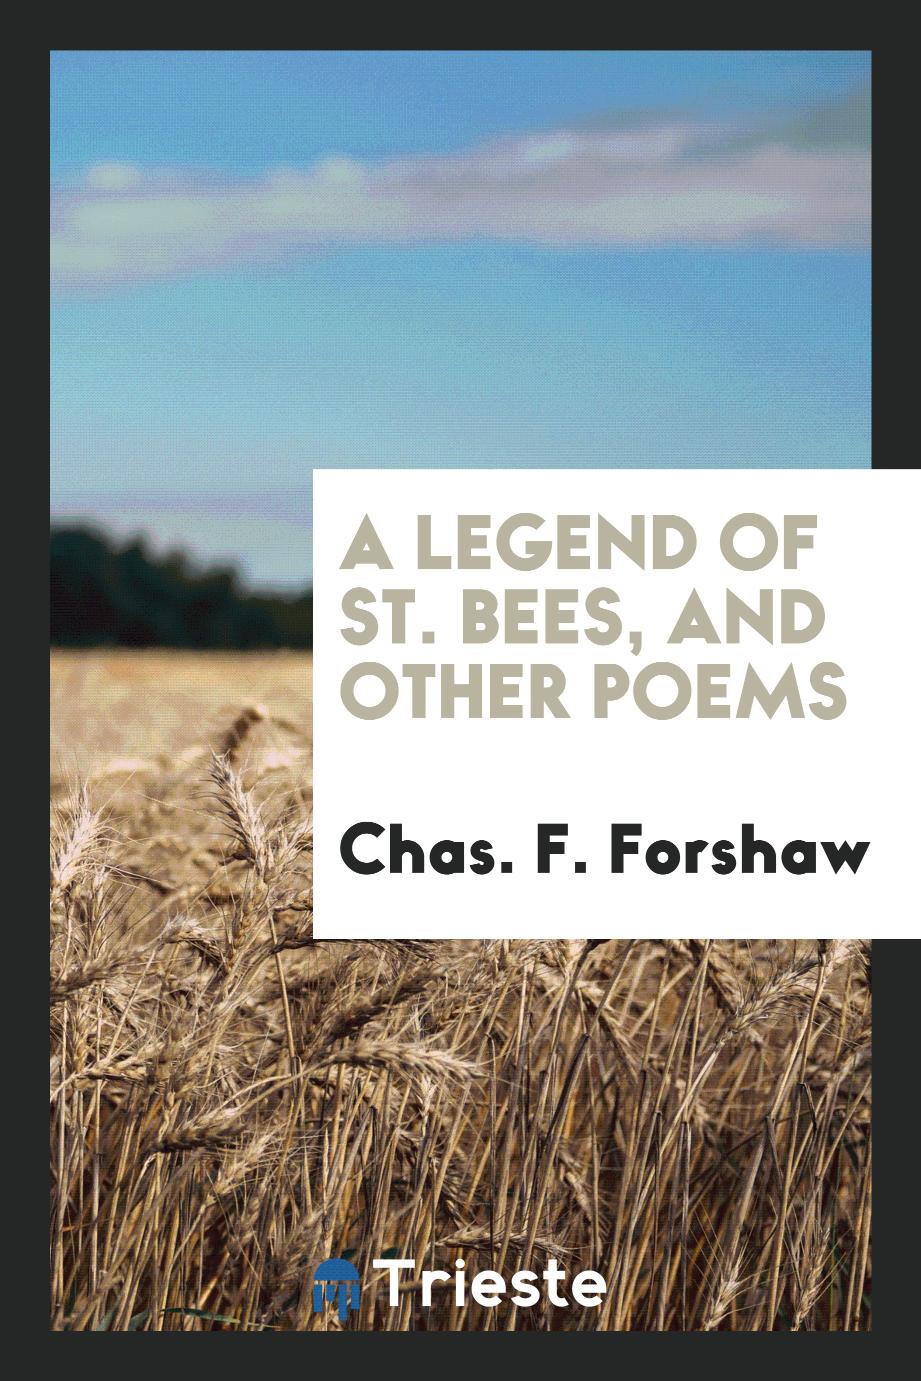 A Legend of St. Bees, and Other Poems